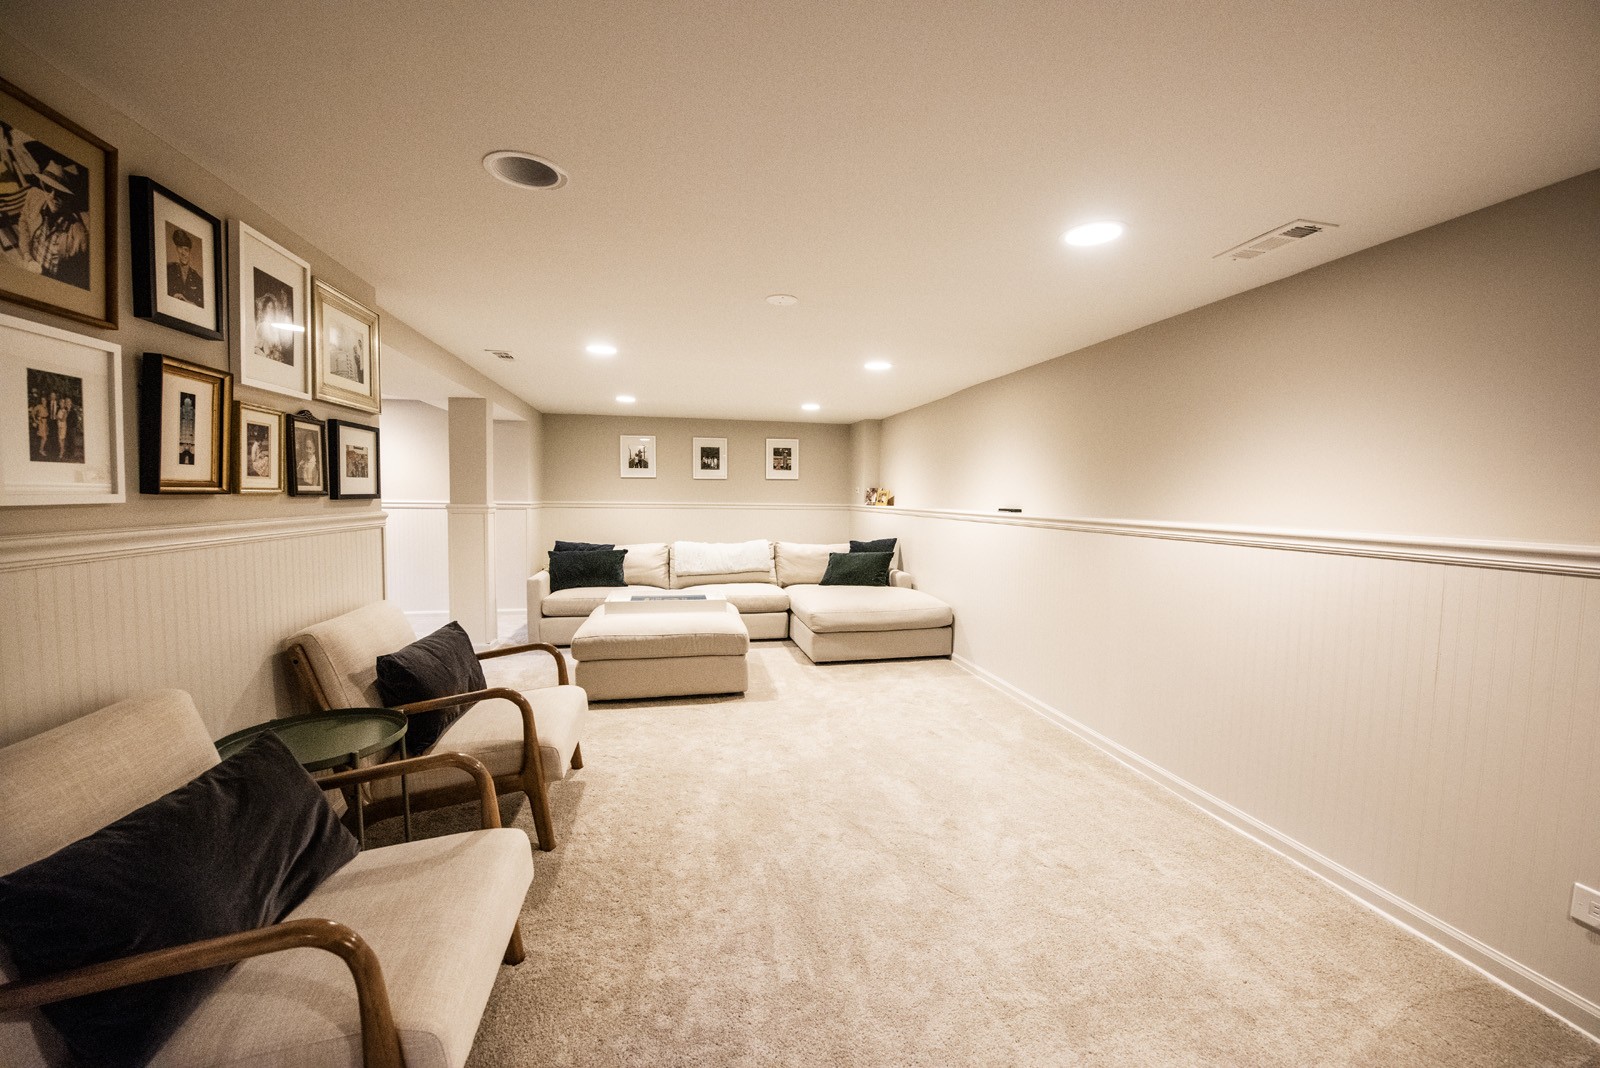 Updated living space with picture wall, white wainscoting, & off-white cloth sectional with matching ottoman & chairs